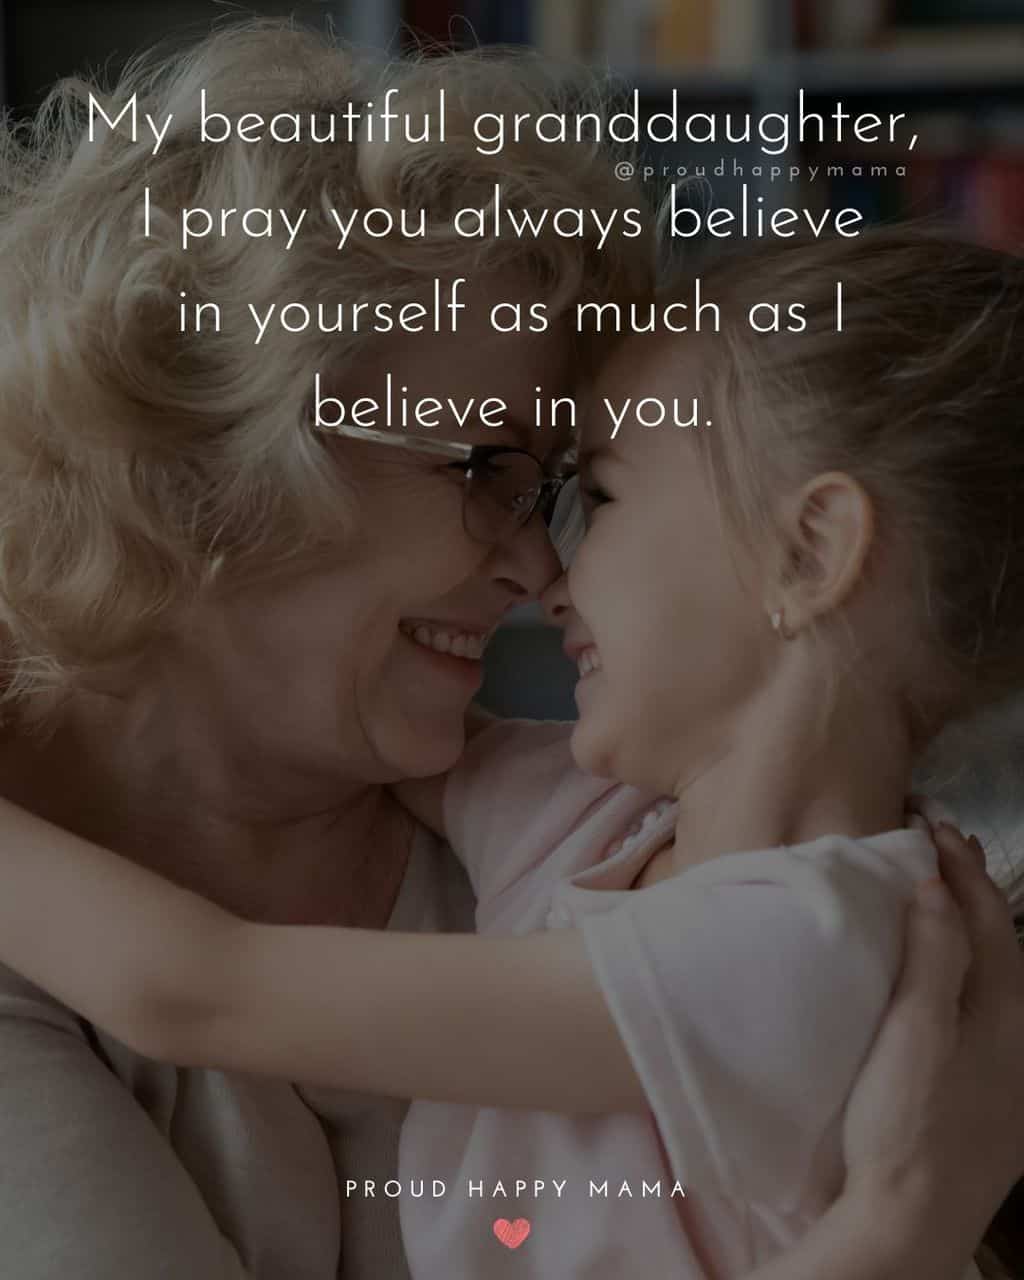 Granddaughter Quotes - My beautiful granddaughter, I pray you always believe in yourself as much as I believe in you.’